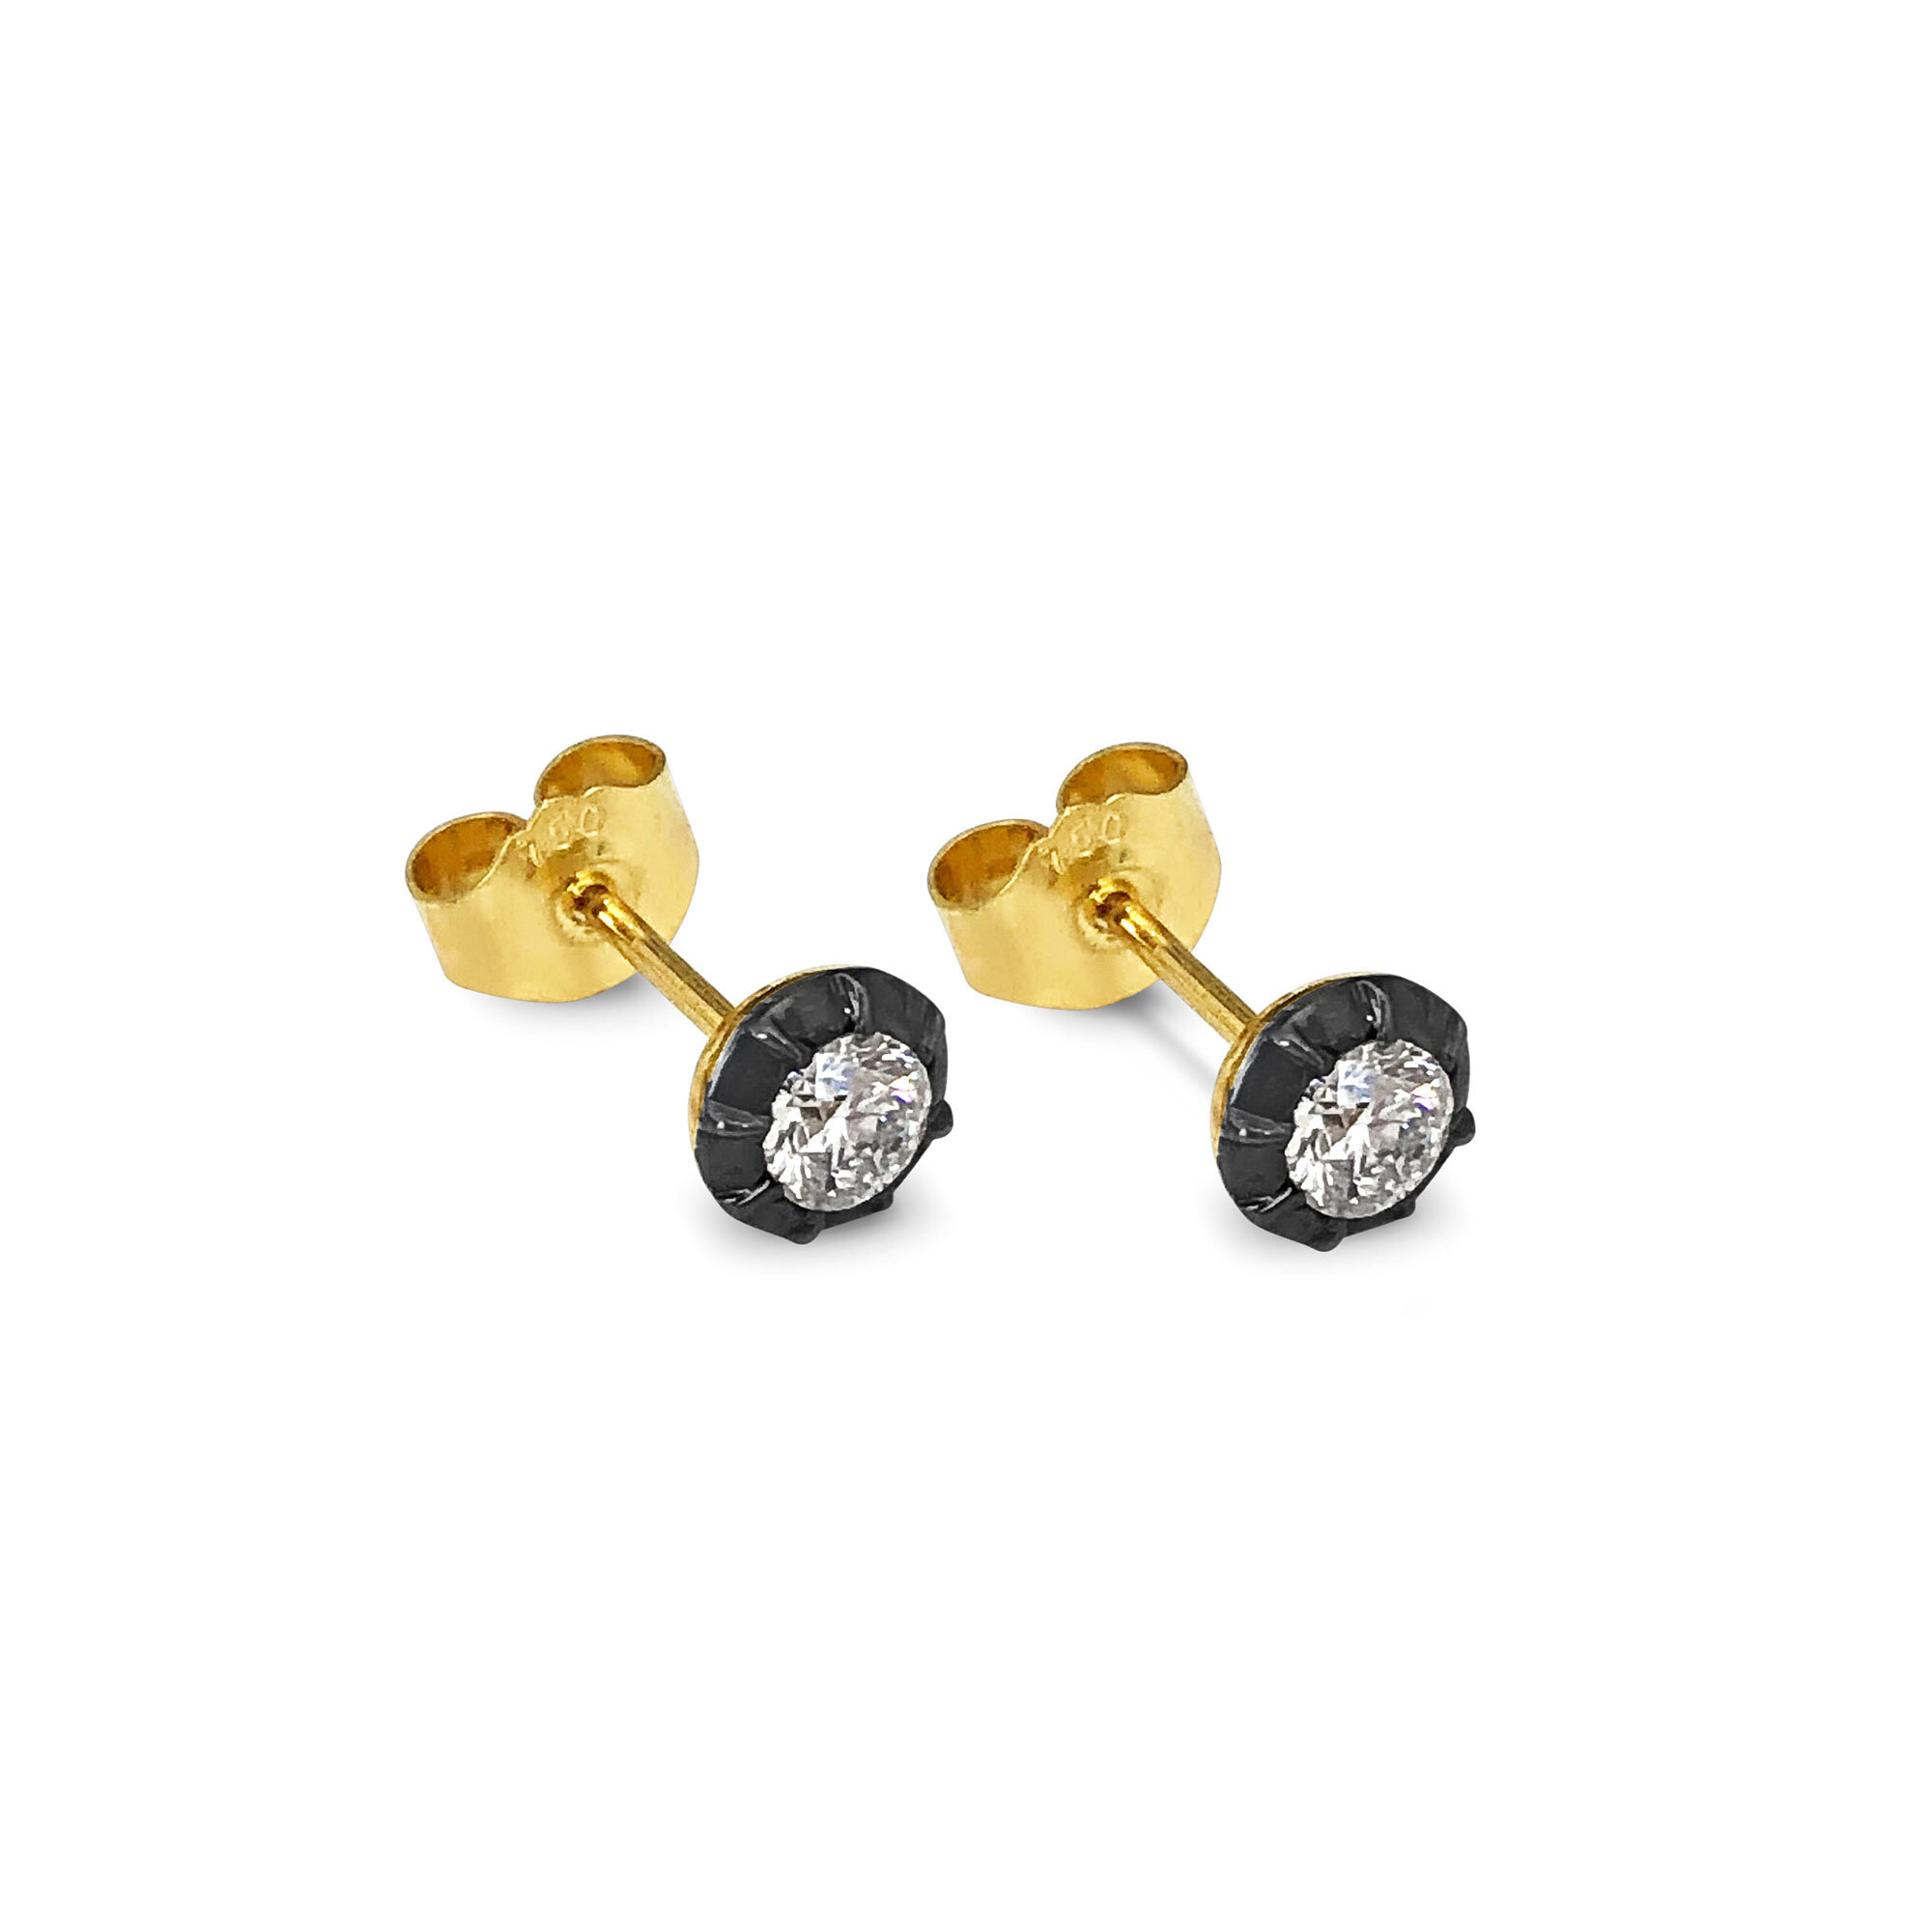 Diamond Stud earrings mounted in black rhodium plated 18ct yellow gold. 